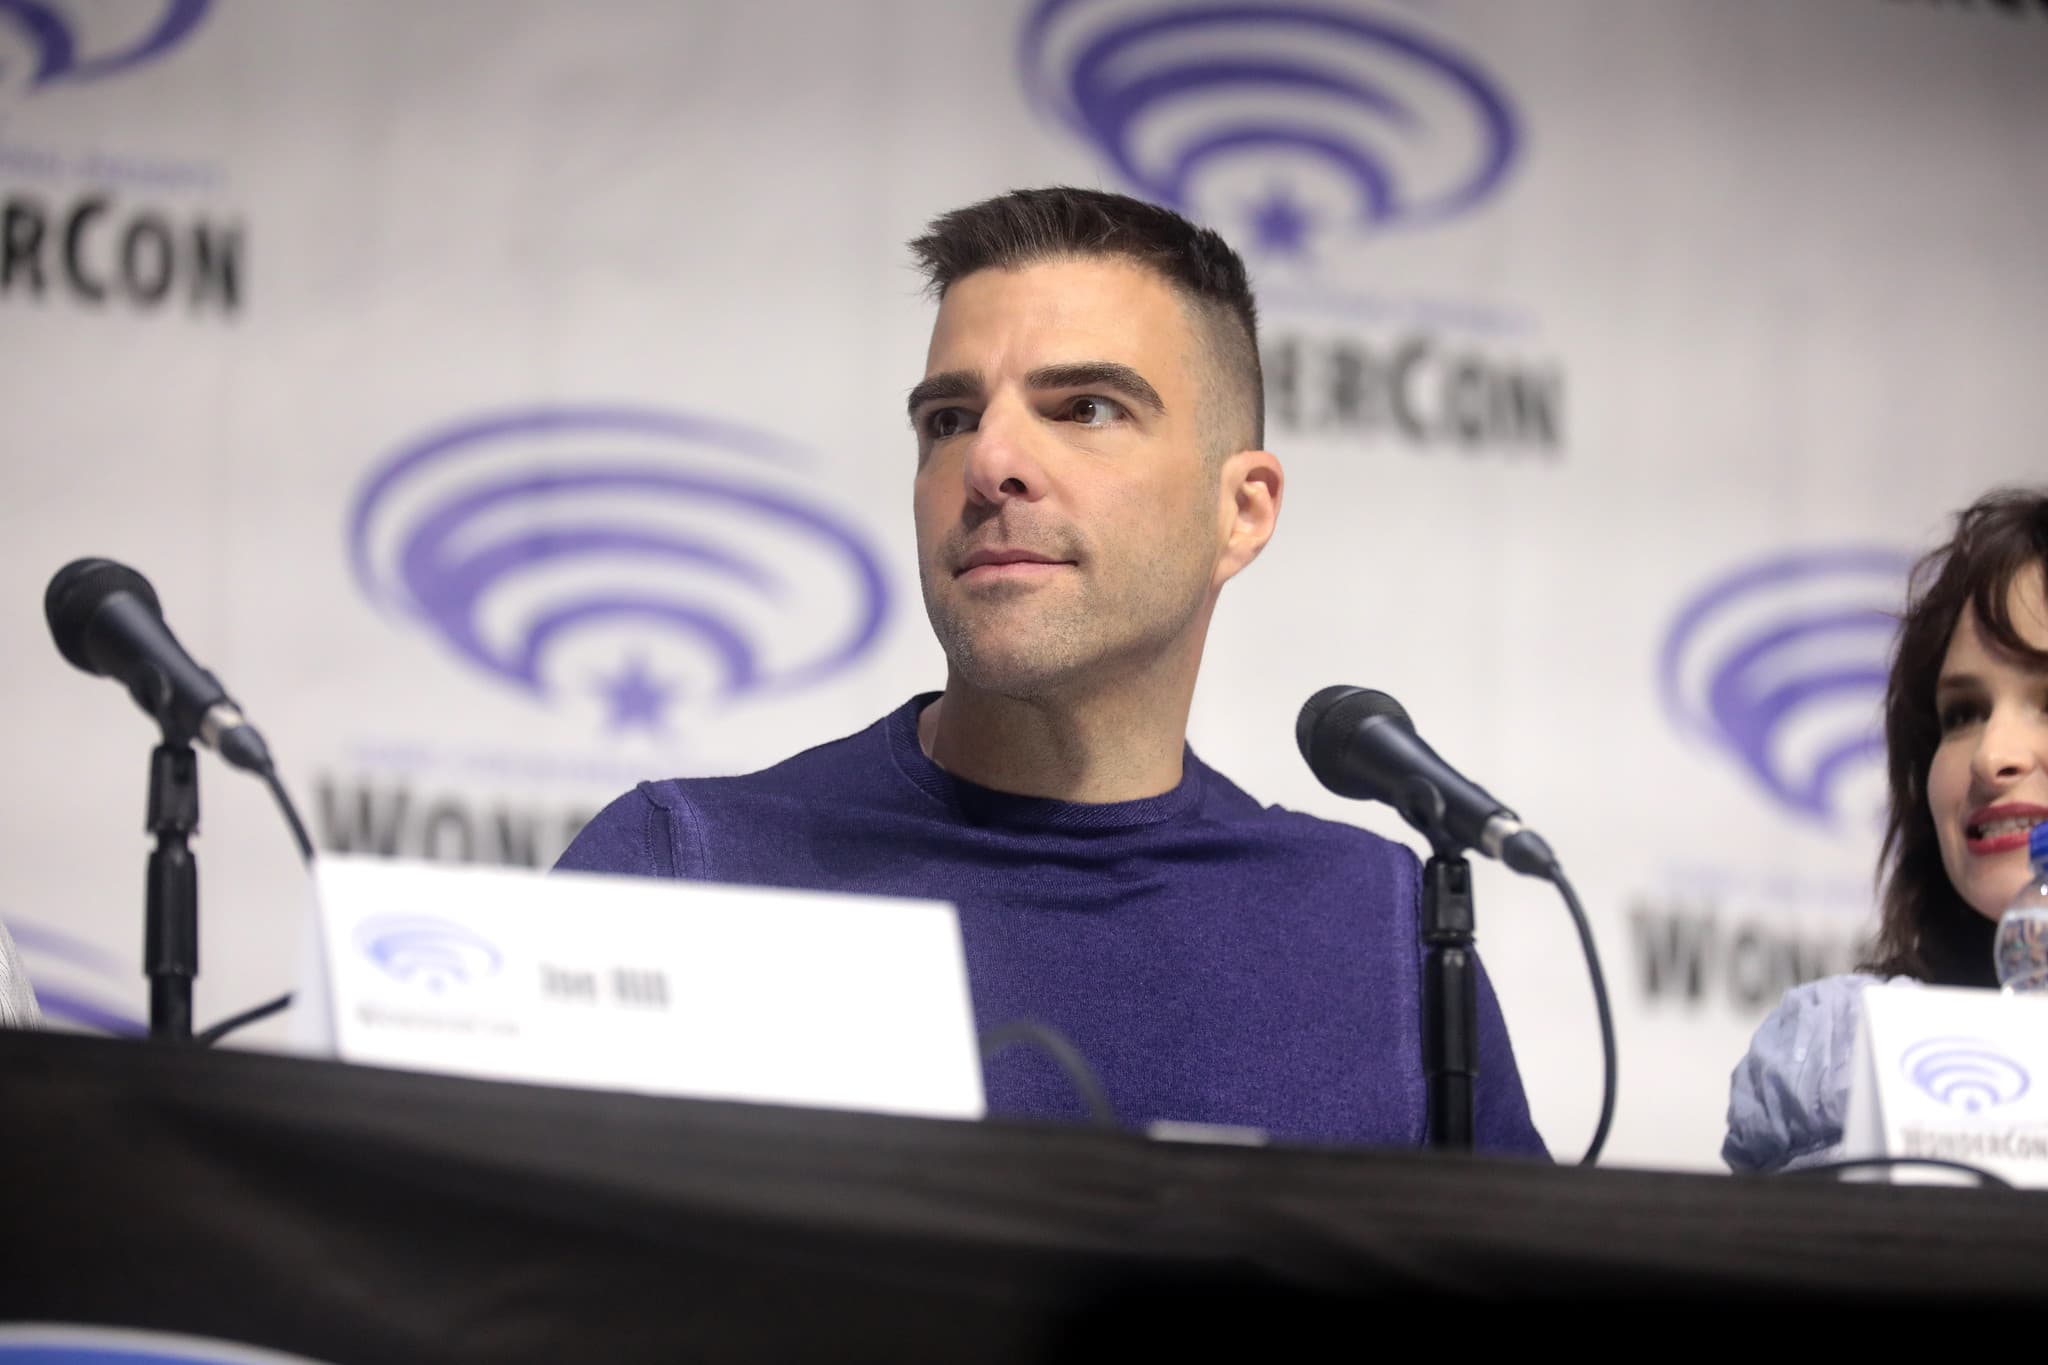 zachary quinto, come out, gay, boys in the band, star trek